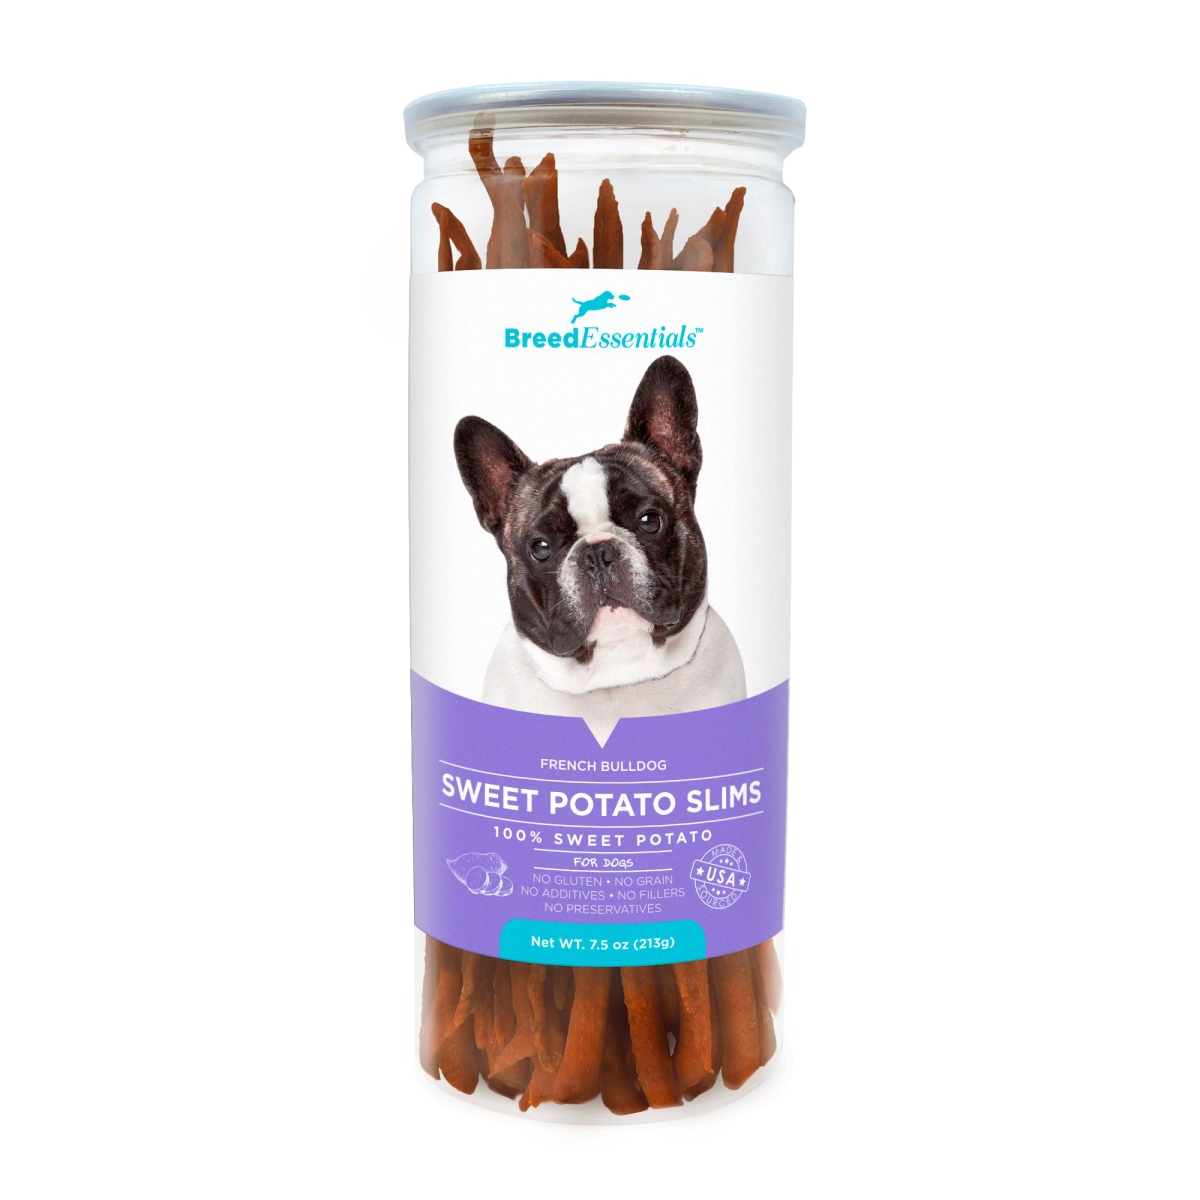 Picture of Breed Essentials 197247000655 7.5 oz Sweet Potato Slims - French Bulldog